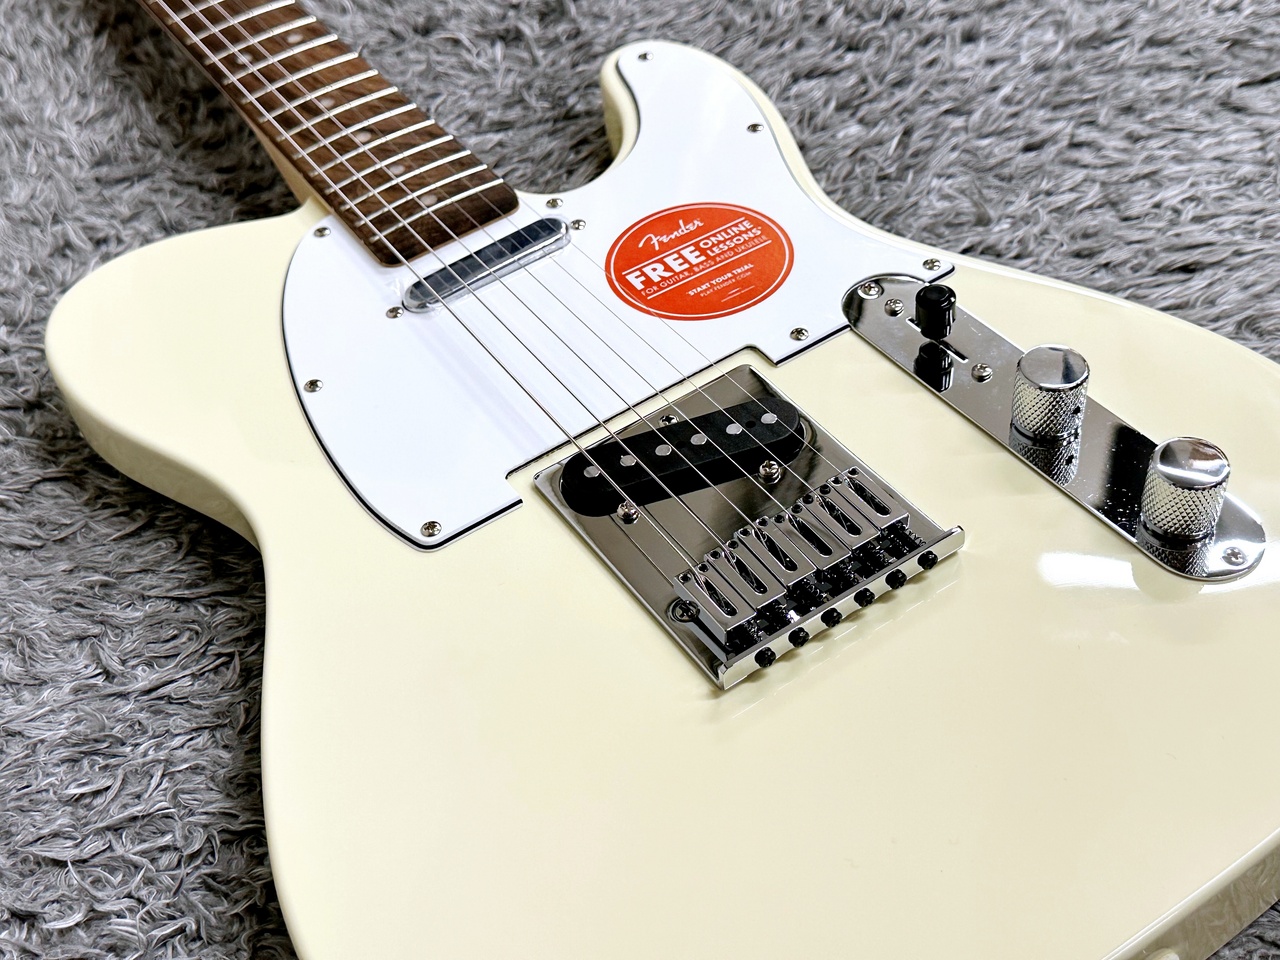 Squier Telecaster by fender white